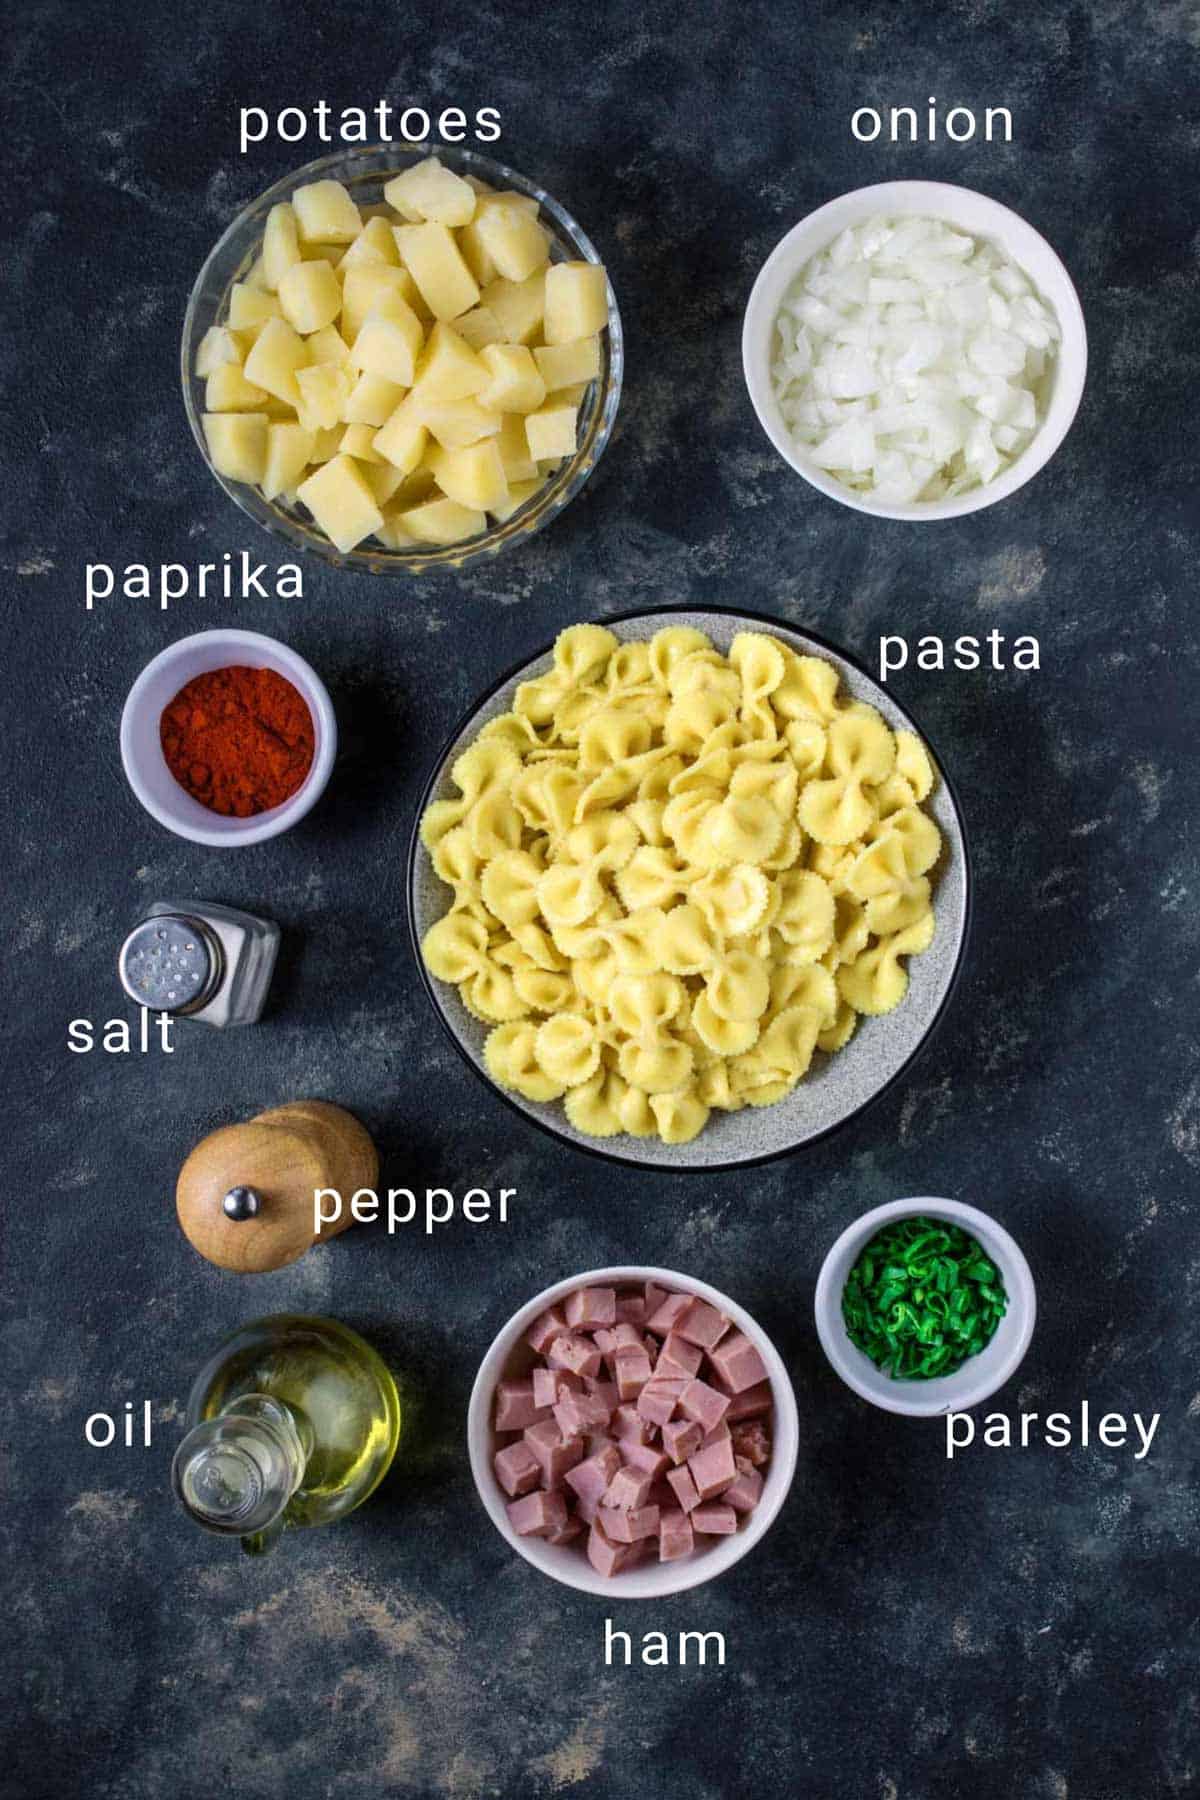 Ingredients for Croatian grenadir dish with potato and pasta.